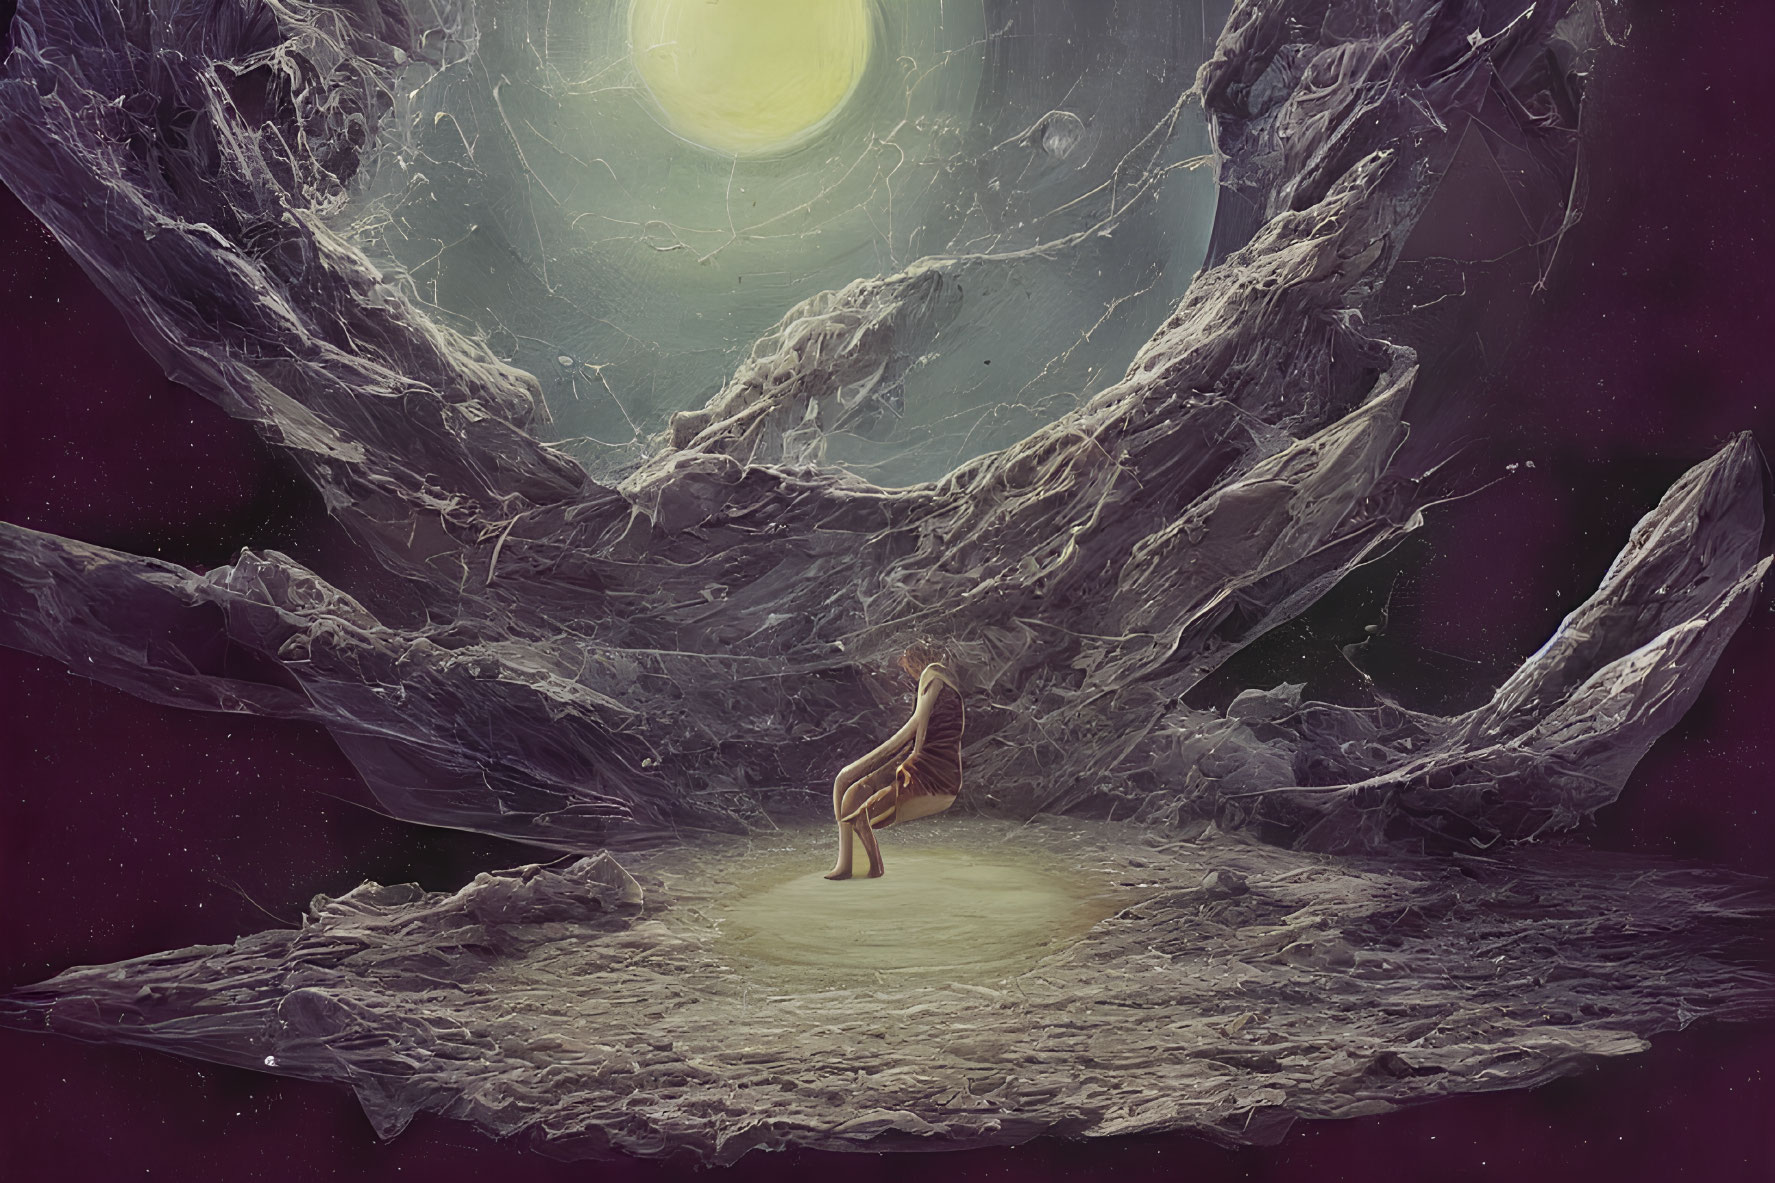 Lonely figure surrounded by rocks and webs under moonlit sky